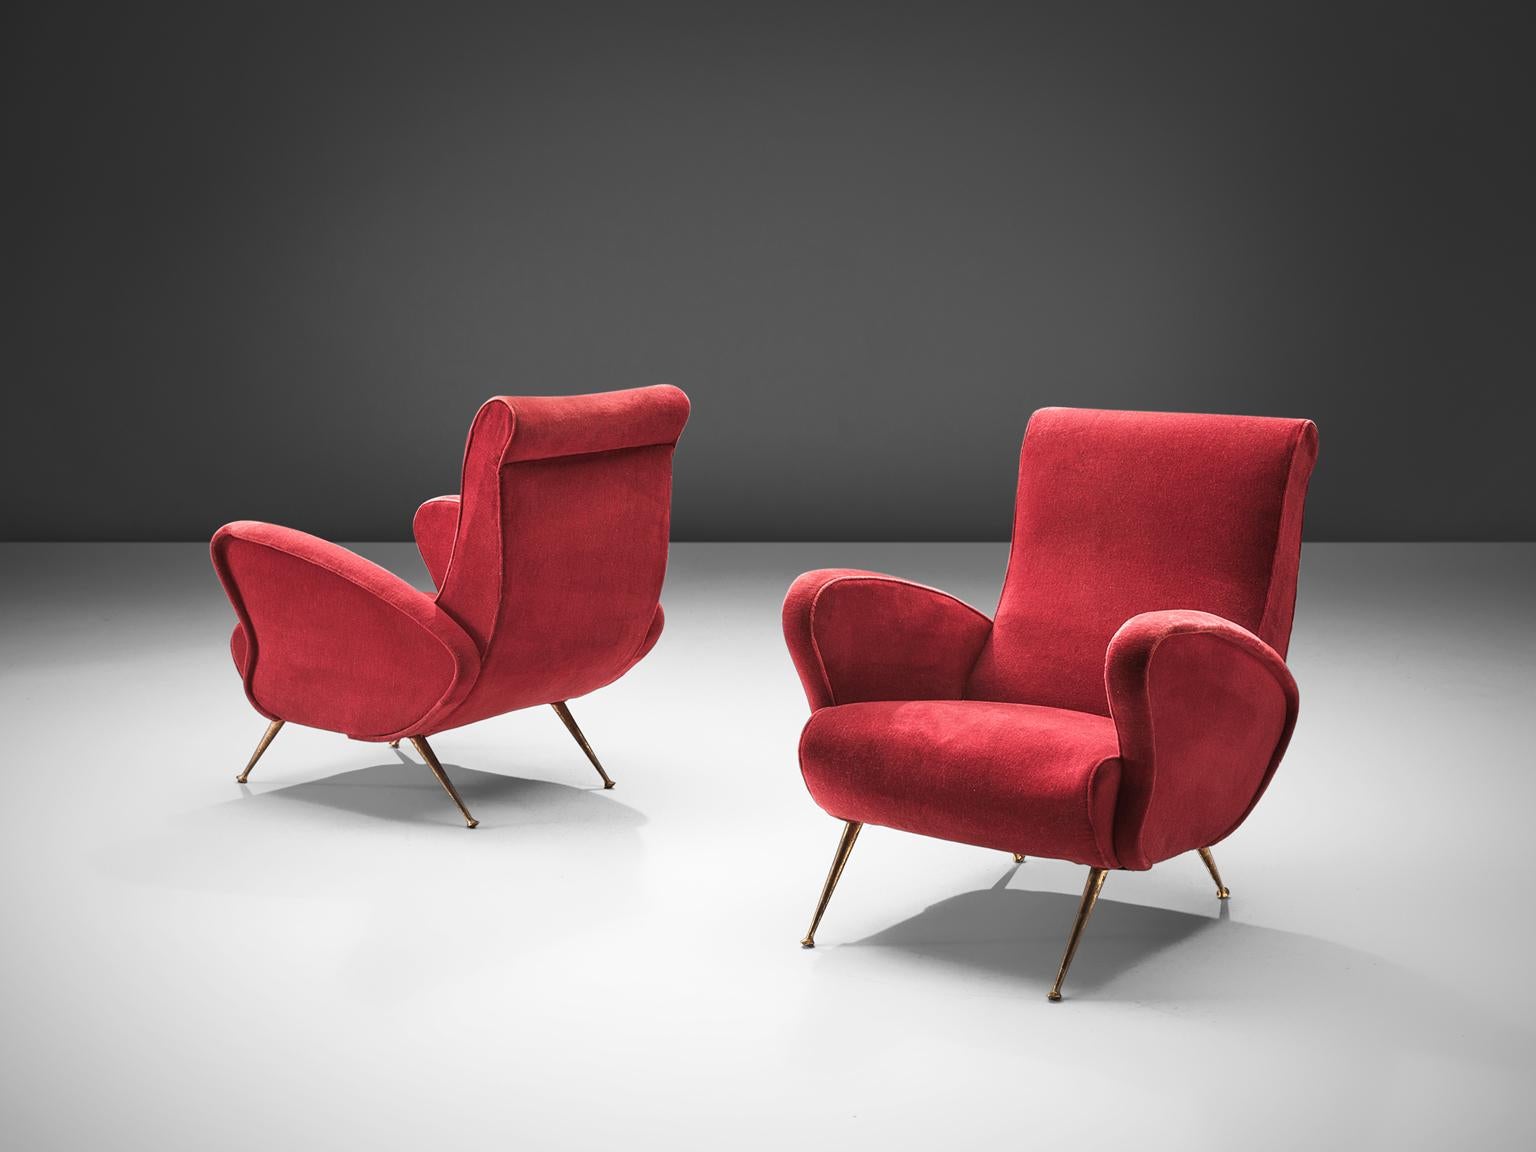 Lounge chairs, original red fabric and brass, Italy, 1950s. 

These chairs are iconic examples of Italian design from the 1950s. Organic and sculptural, these easy chairs are anything but minimalistic. Equipped with the original stiletto brass